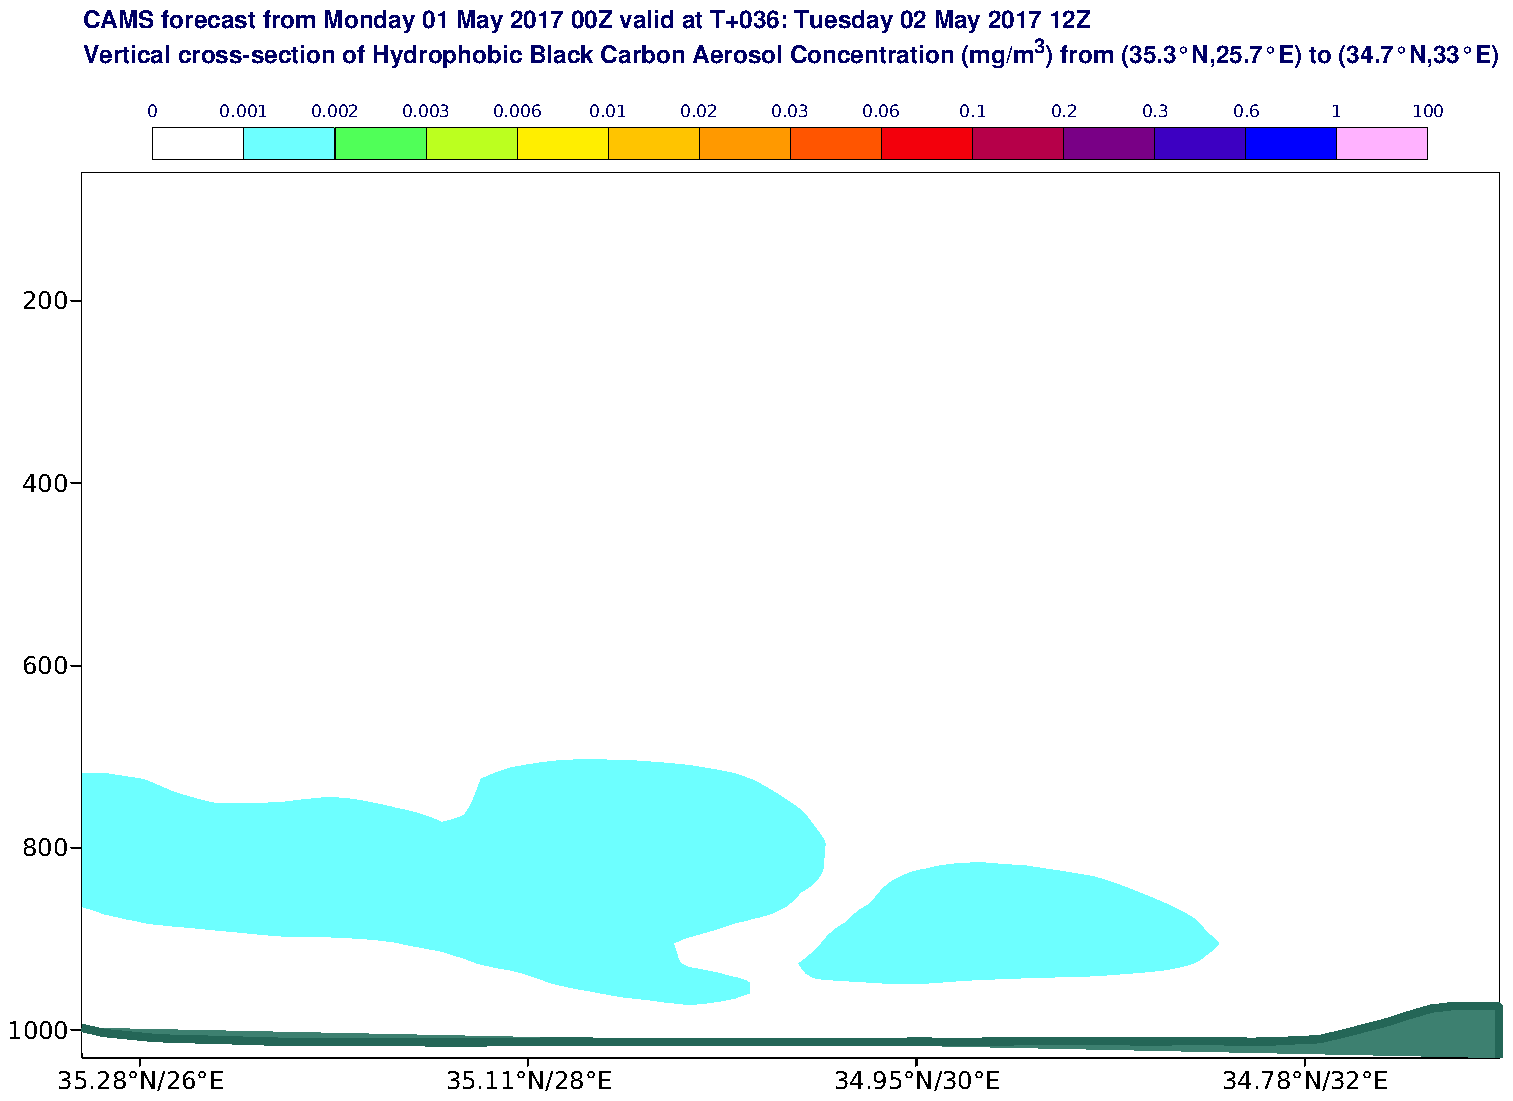 Vertical cross-section of Hydrophobic Black Carbon Aerosol Concentration (mg/m3) valid at T36 - 2017-05-02 12:00